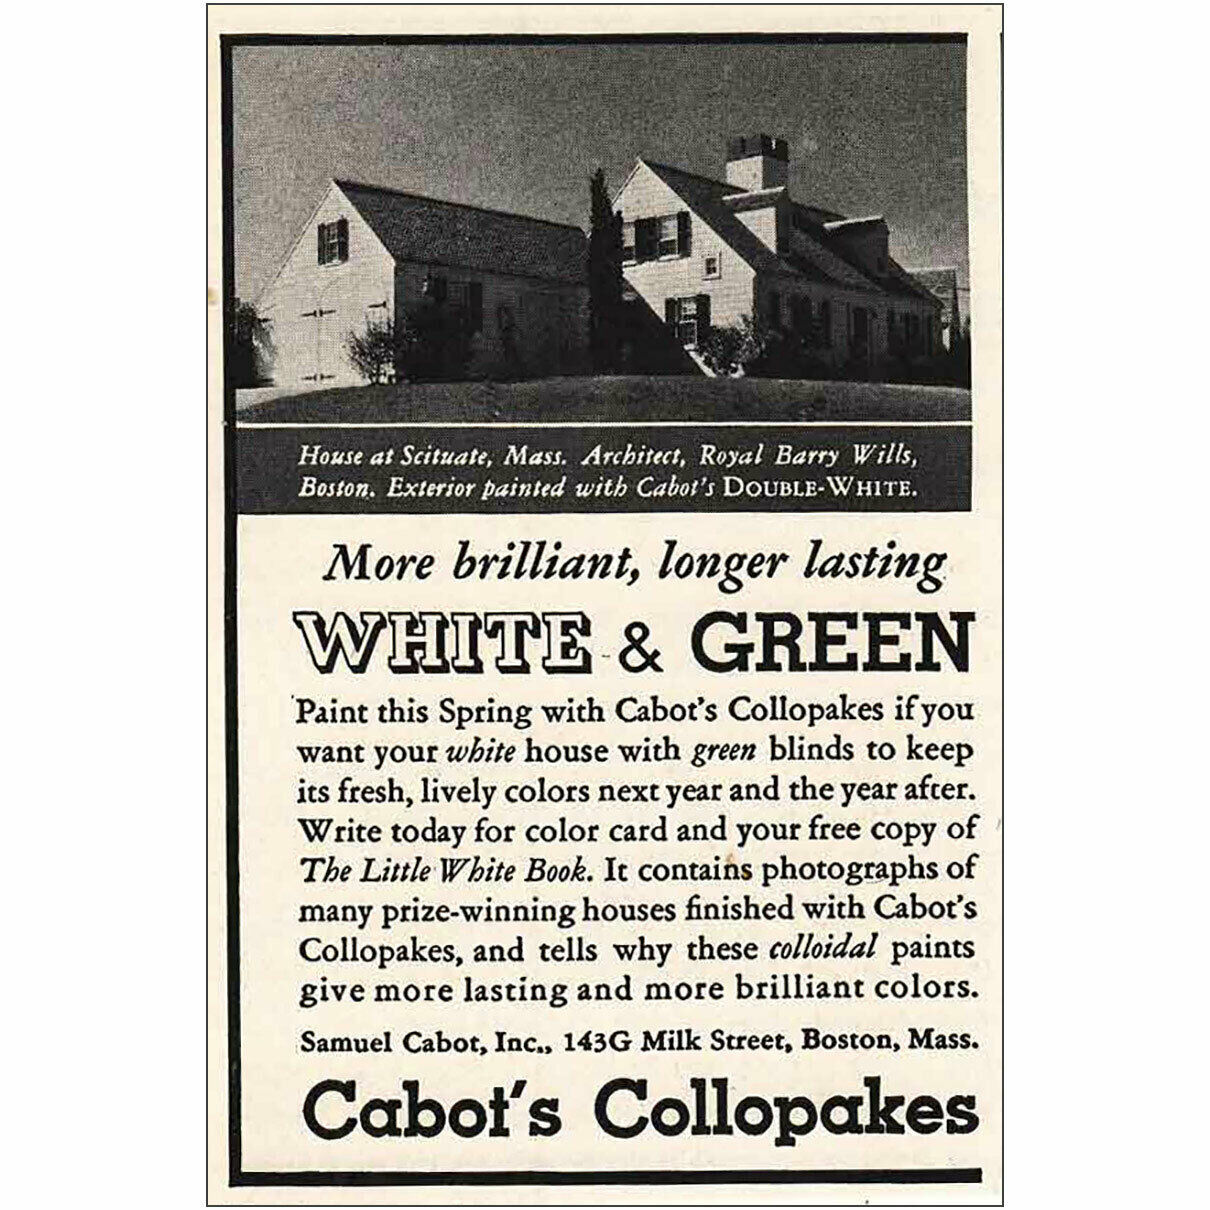 1936 Cabot's Callopakes: Longer Lasting White And Green Vintage Print Ad